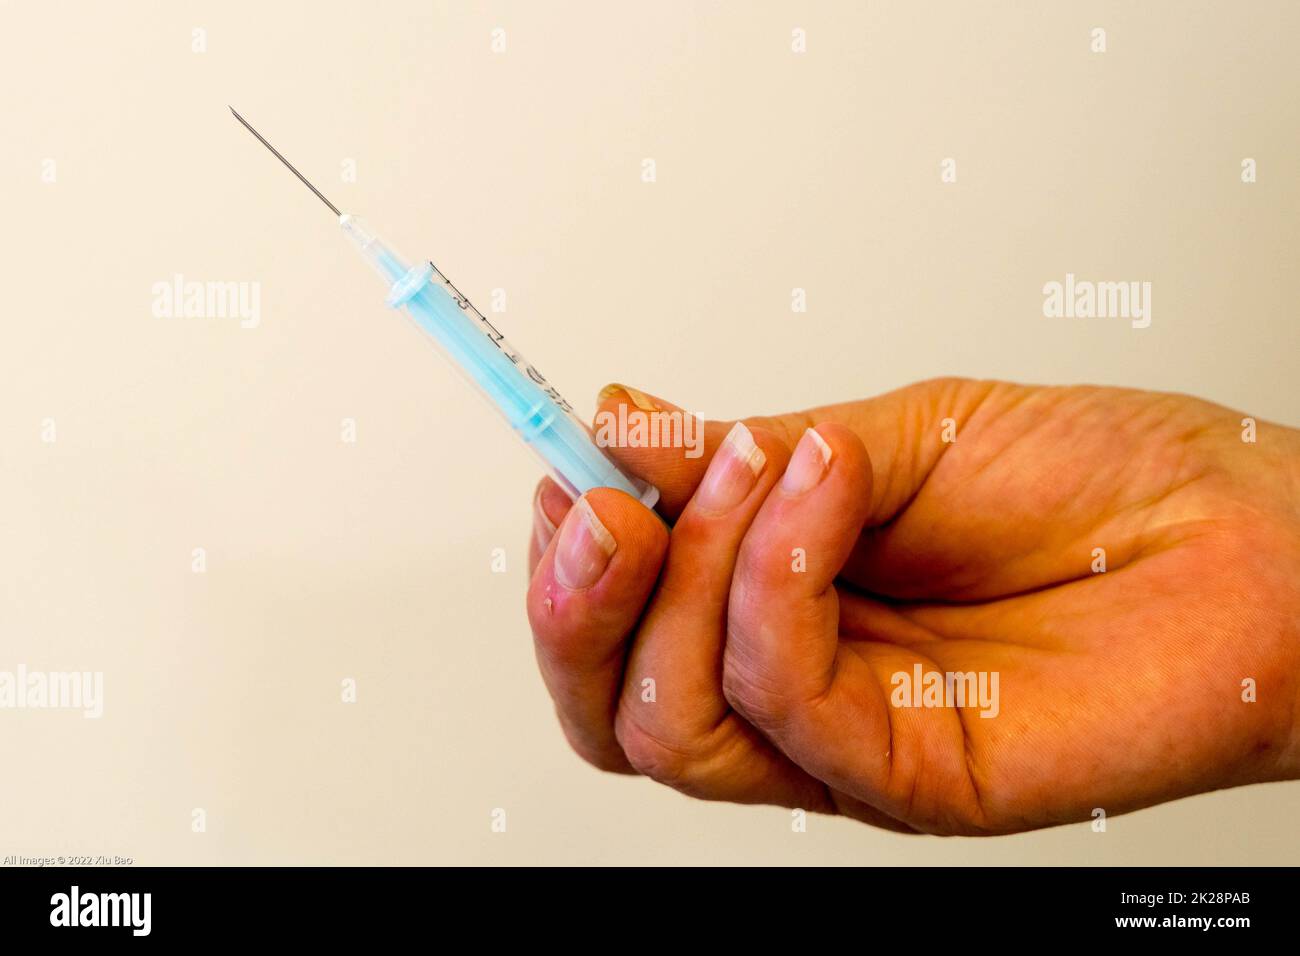 London UK, 22nd September 2022. disposable syringe with needle attached for vaccine injection. South East London Clinical Commissioning group is administering COVID-19 autumn booster vaccine to millions of eligible people as lifesaving vaccination campaign to protect the nation ahead of winter is in full swing Credit:   Xiu Bao/Alamy Live News Stock Photo